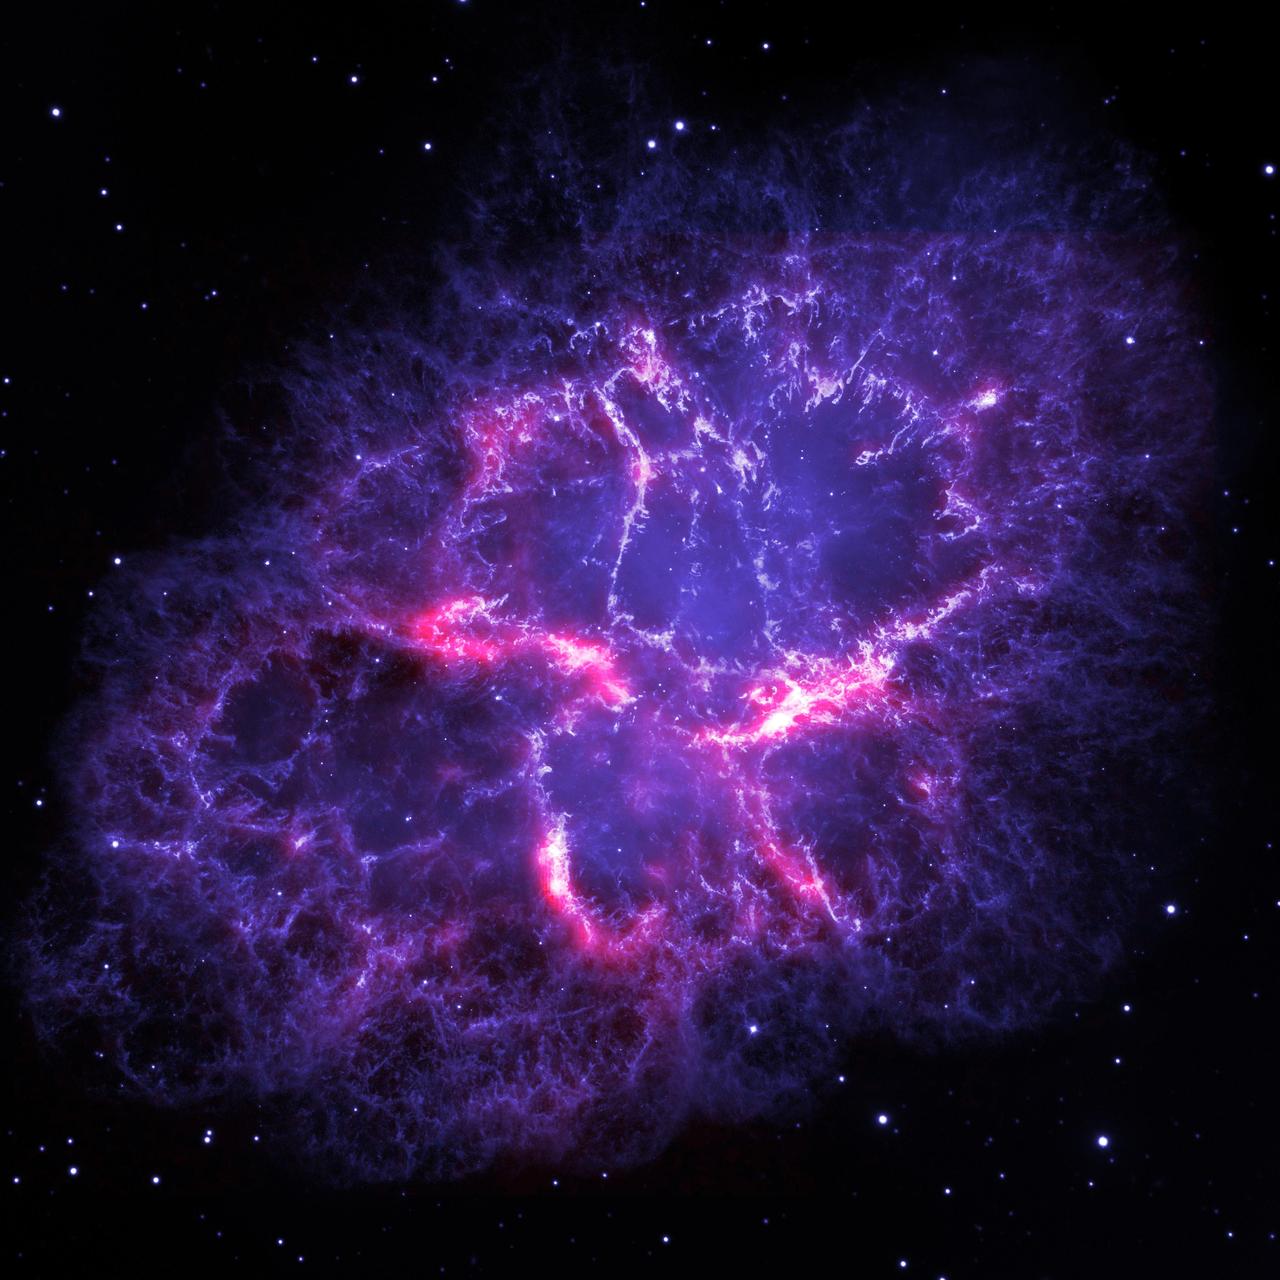 A composite image of the Crab Nebula made up of the Hubble Space Telescope image (blue) and the Herschel PACS image (red), which shows the location of the dusty filaments. The brightest (white) parts of the image show the locations of the dust and argon hydride molecules newly discovered in this remnant.